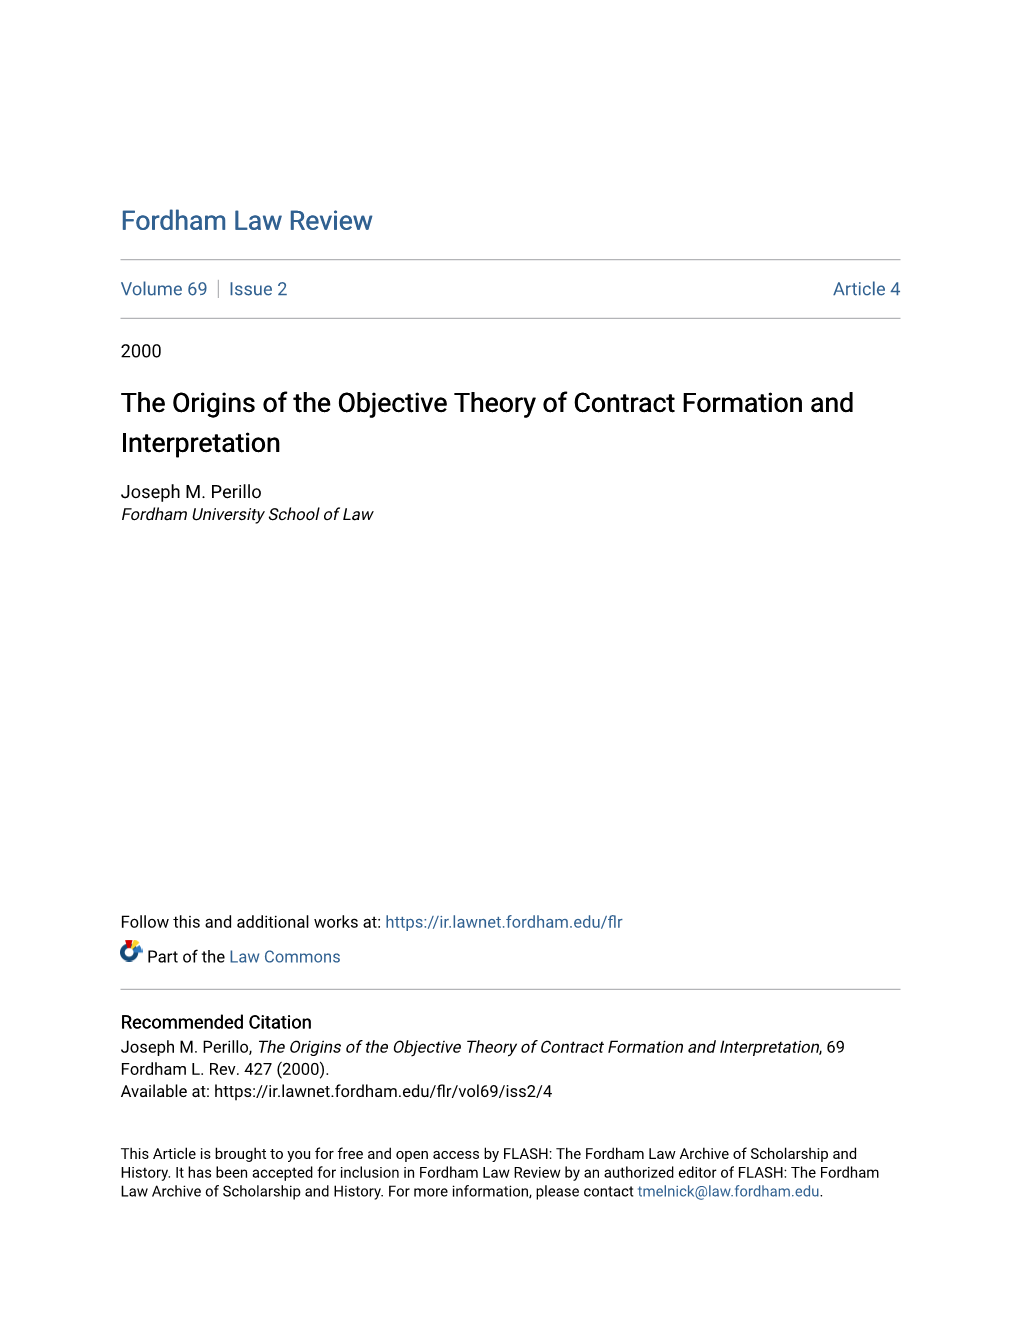 The Origins of the Objective Theory of Contract Formation and Interpretation